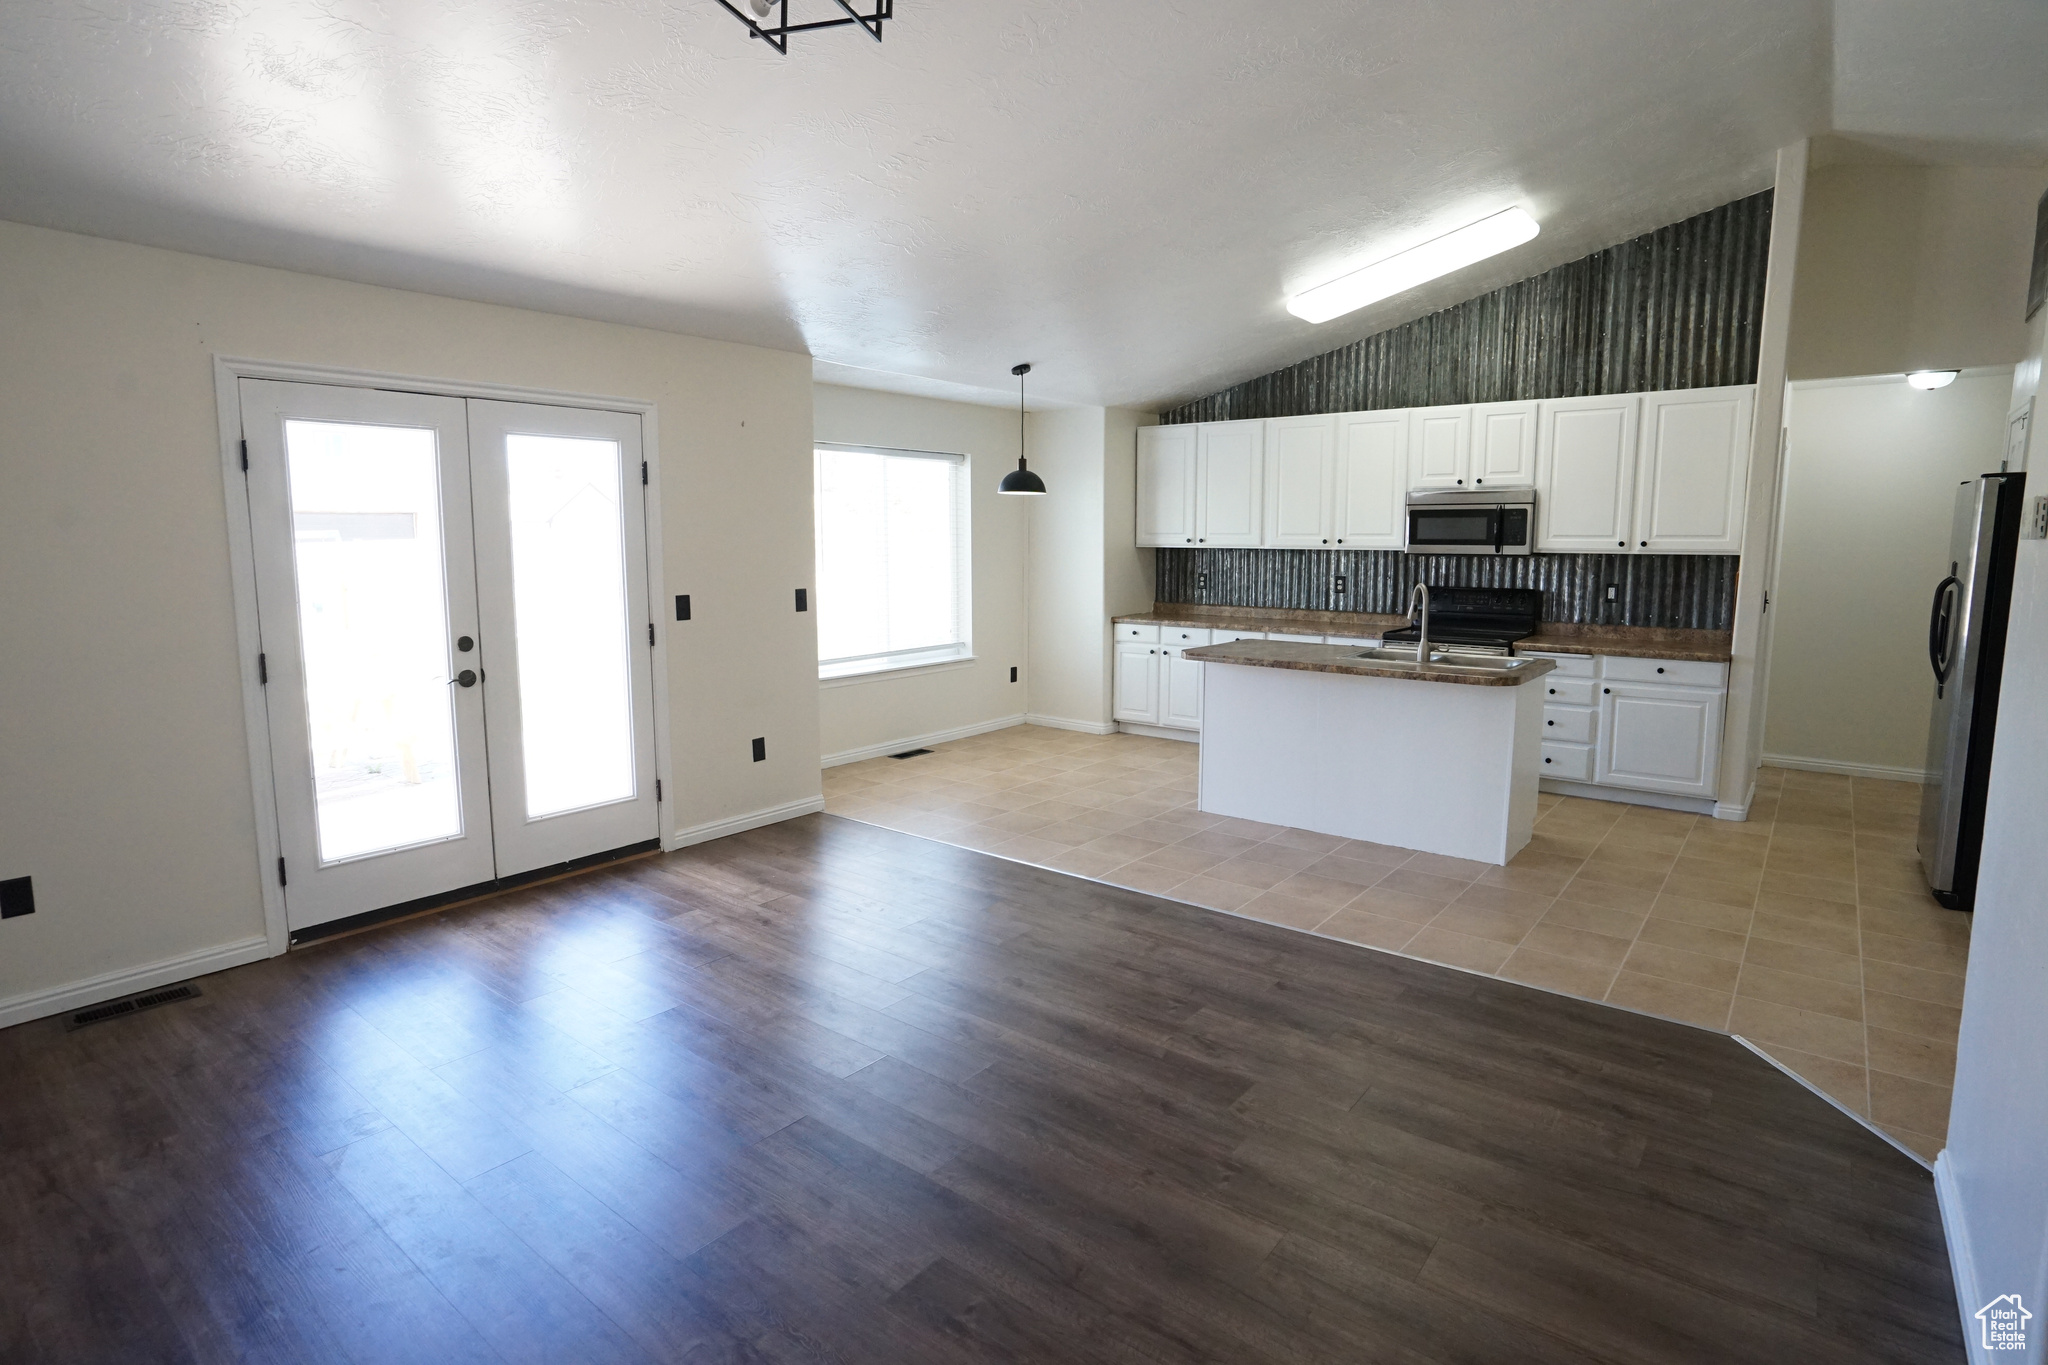 Kitchen featuring appliances with stainless steel finishes, white cabinets, light hardwood / wood-style floors, decorative light fixtures, and an island with sink